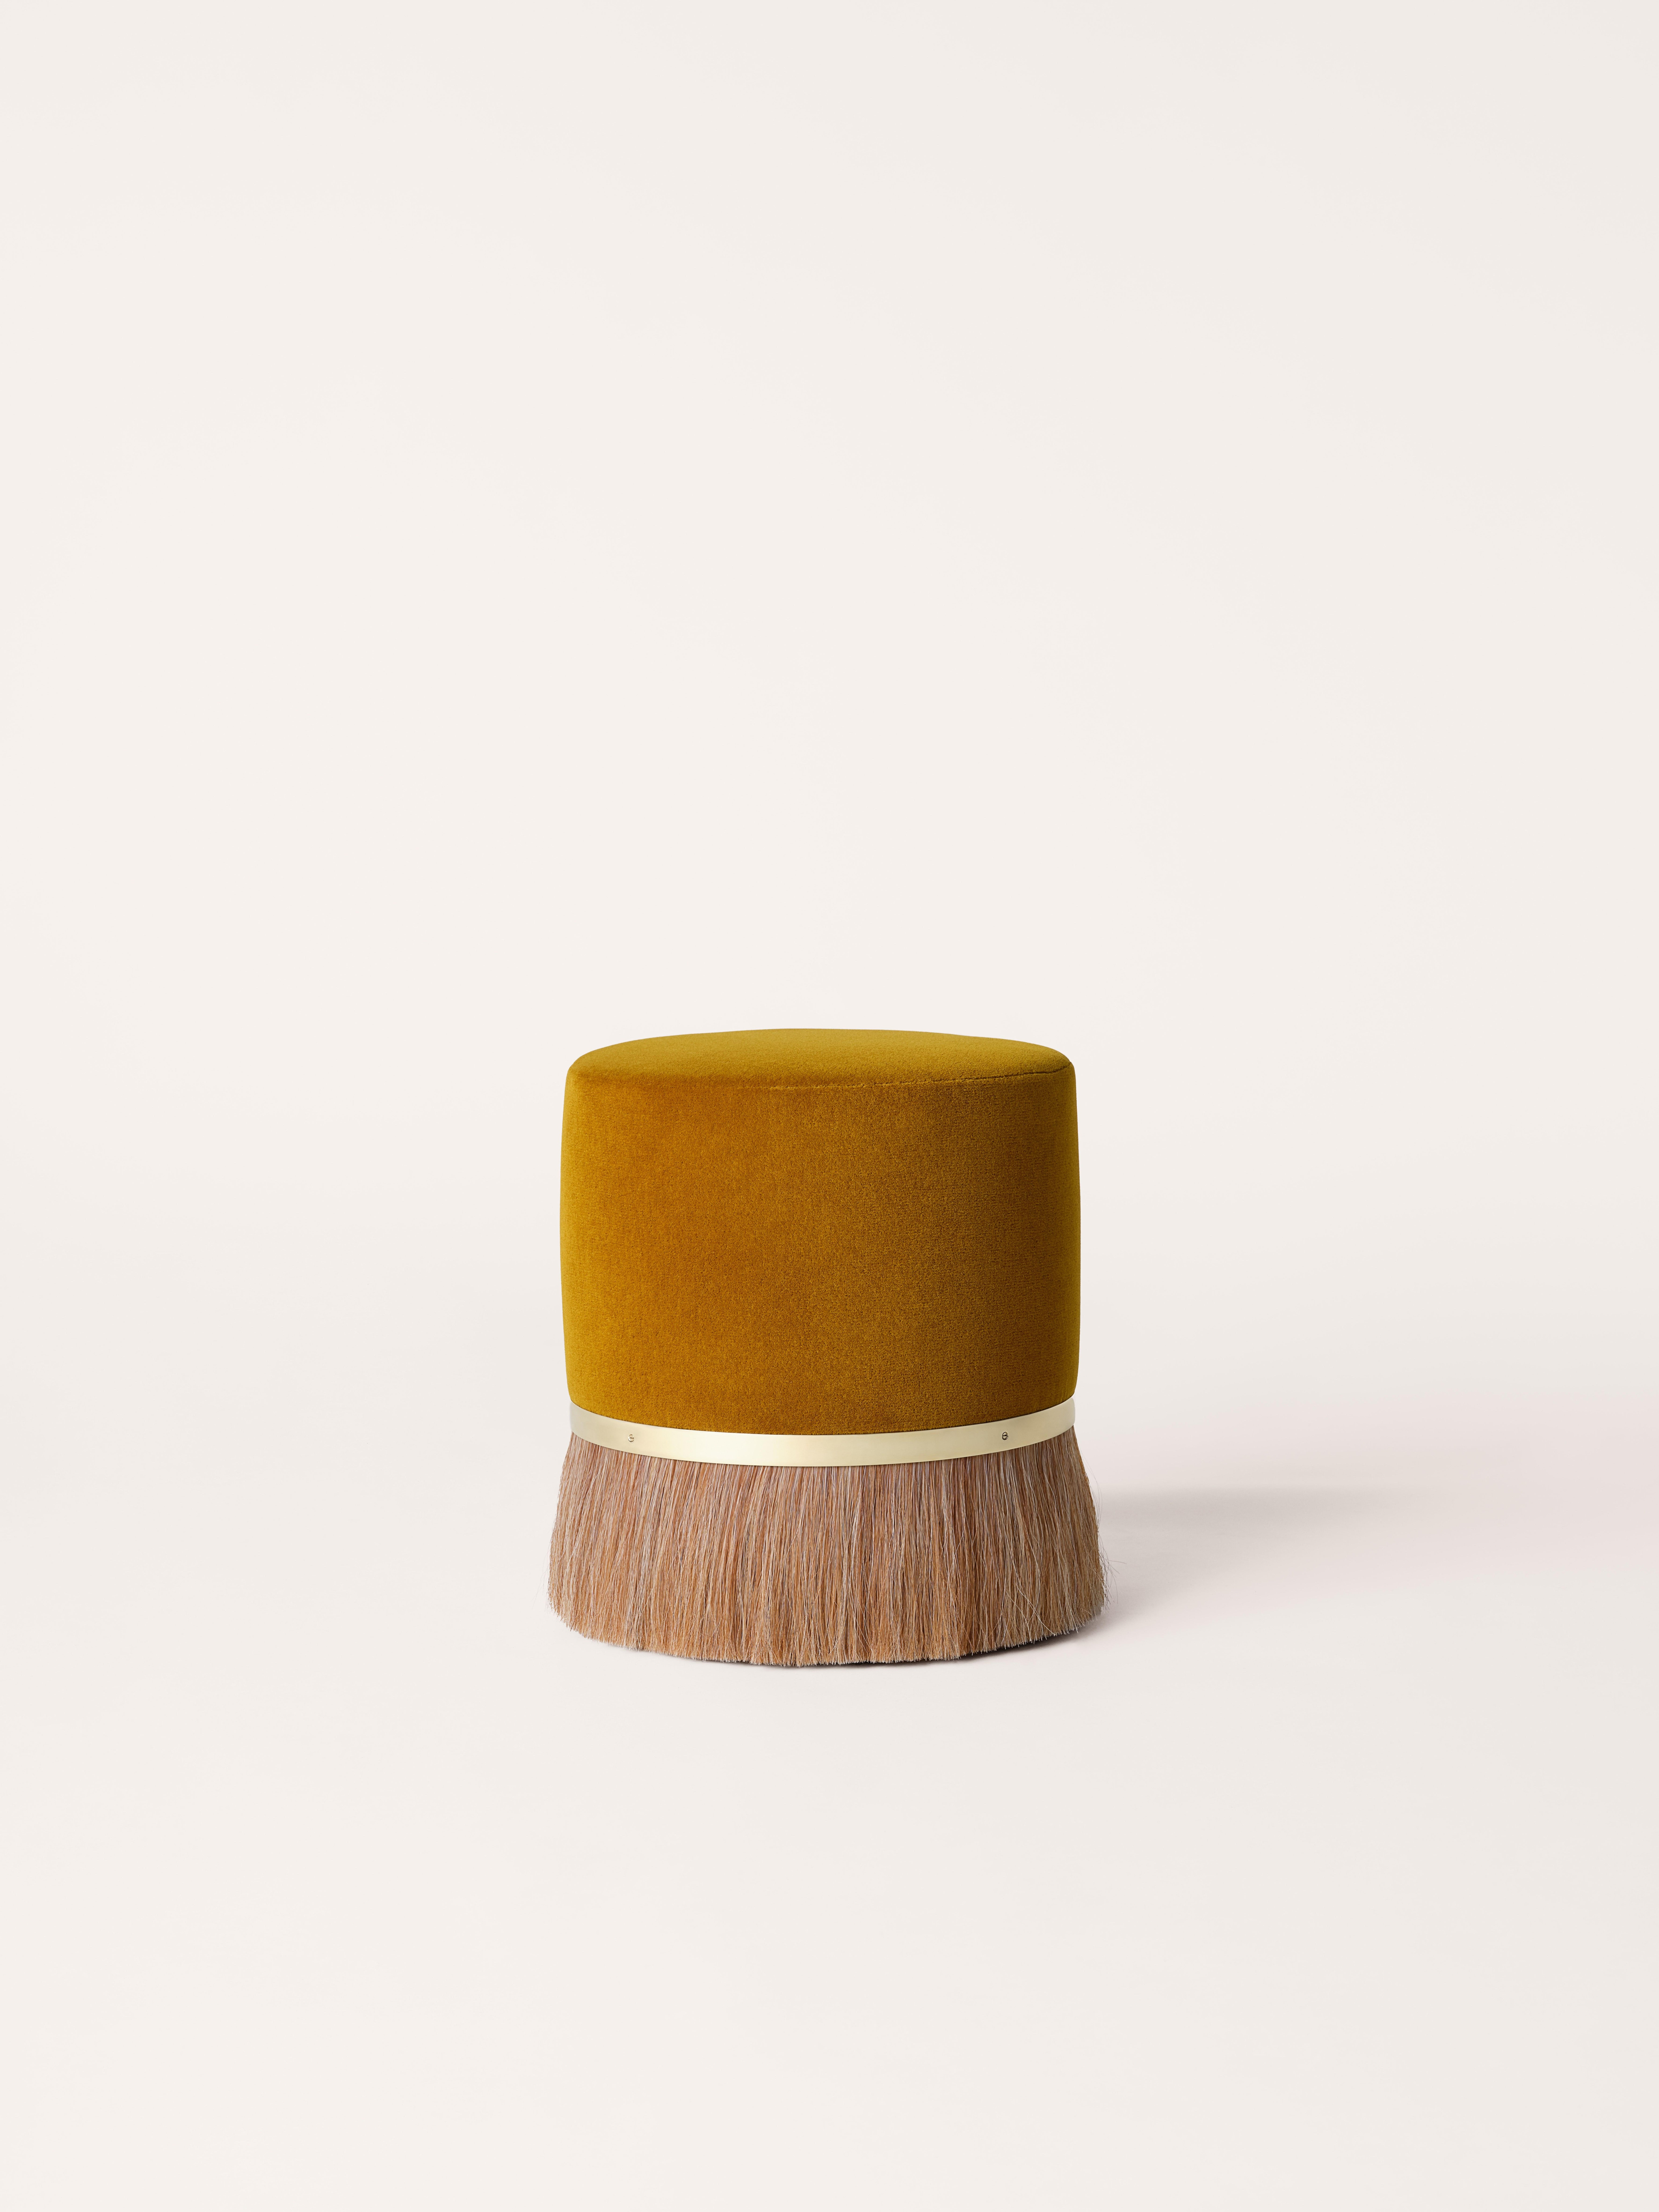 Konekt's signature thing stools are available in four different styles and feature upholstered velvet tops, solid brass rings and horse hair. Refined yet wild, Thing 3's unique personality is accentuated with a distinctive combination of contrasting